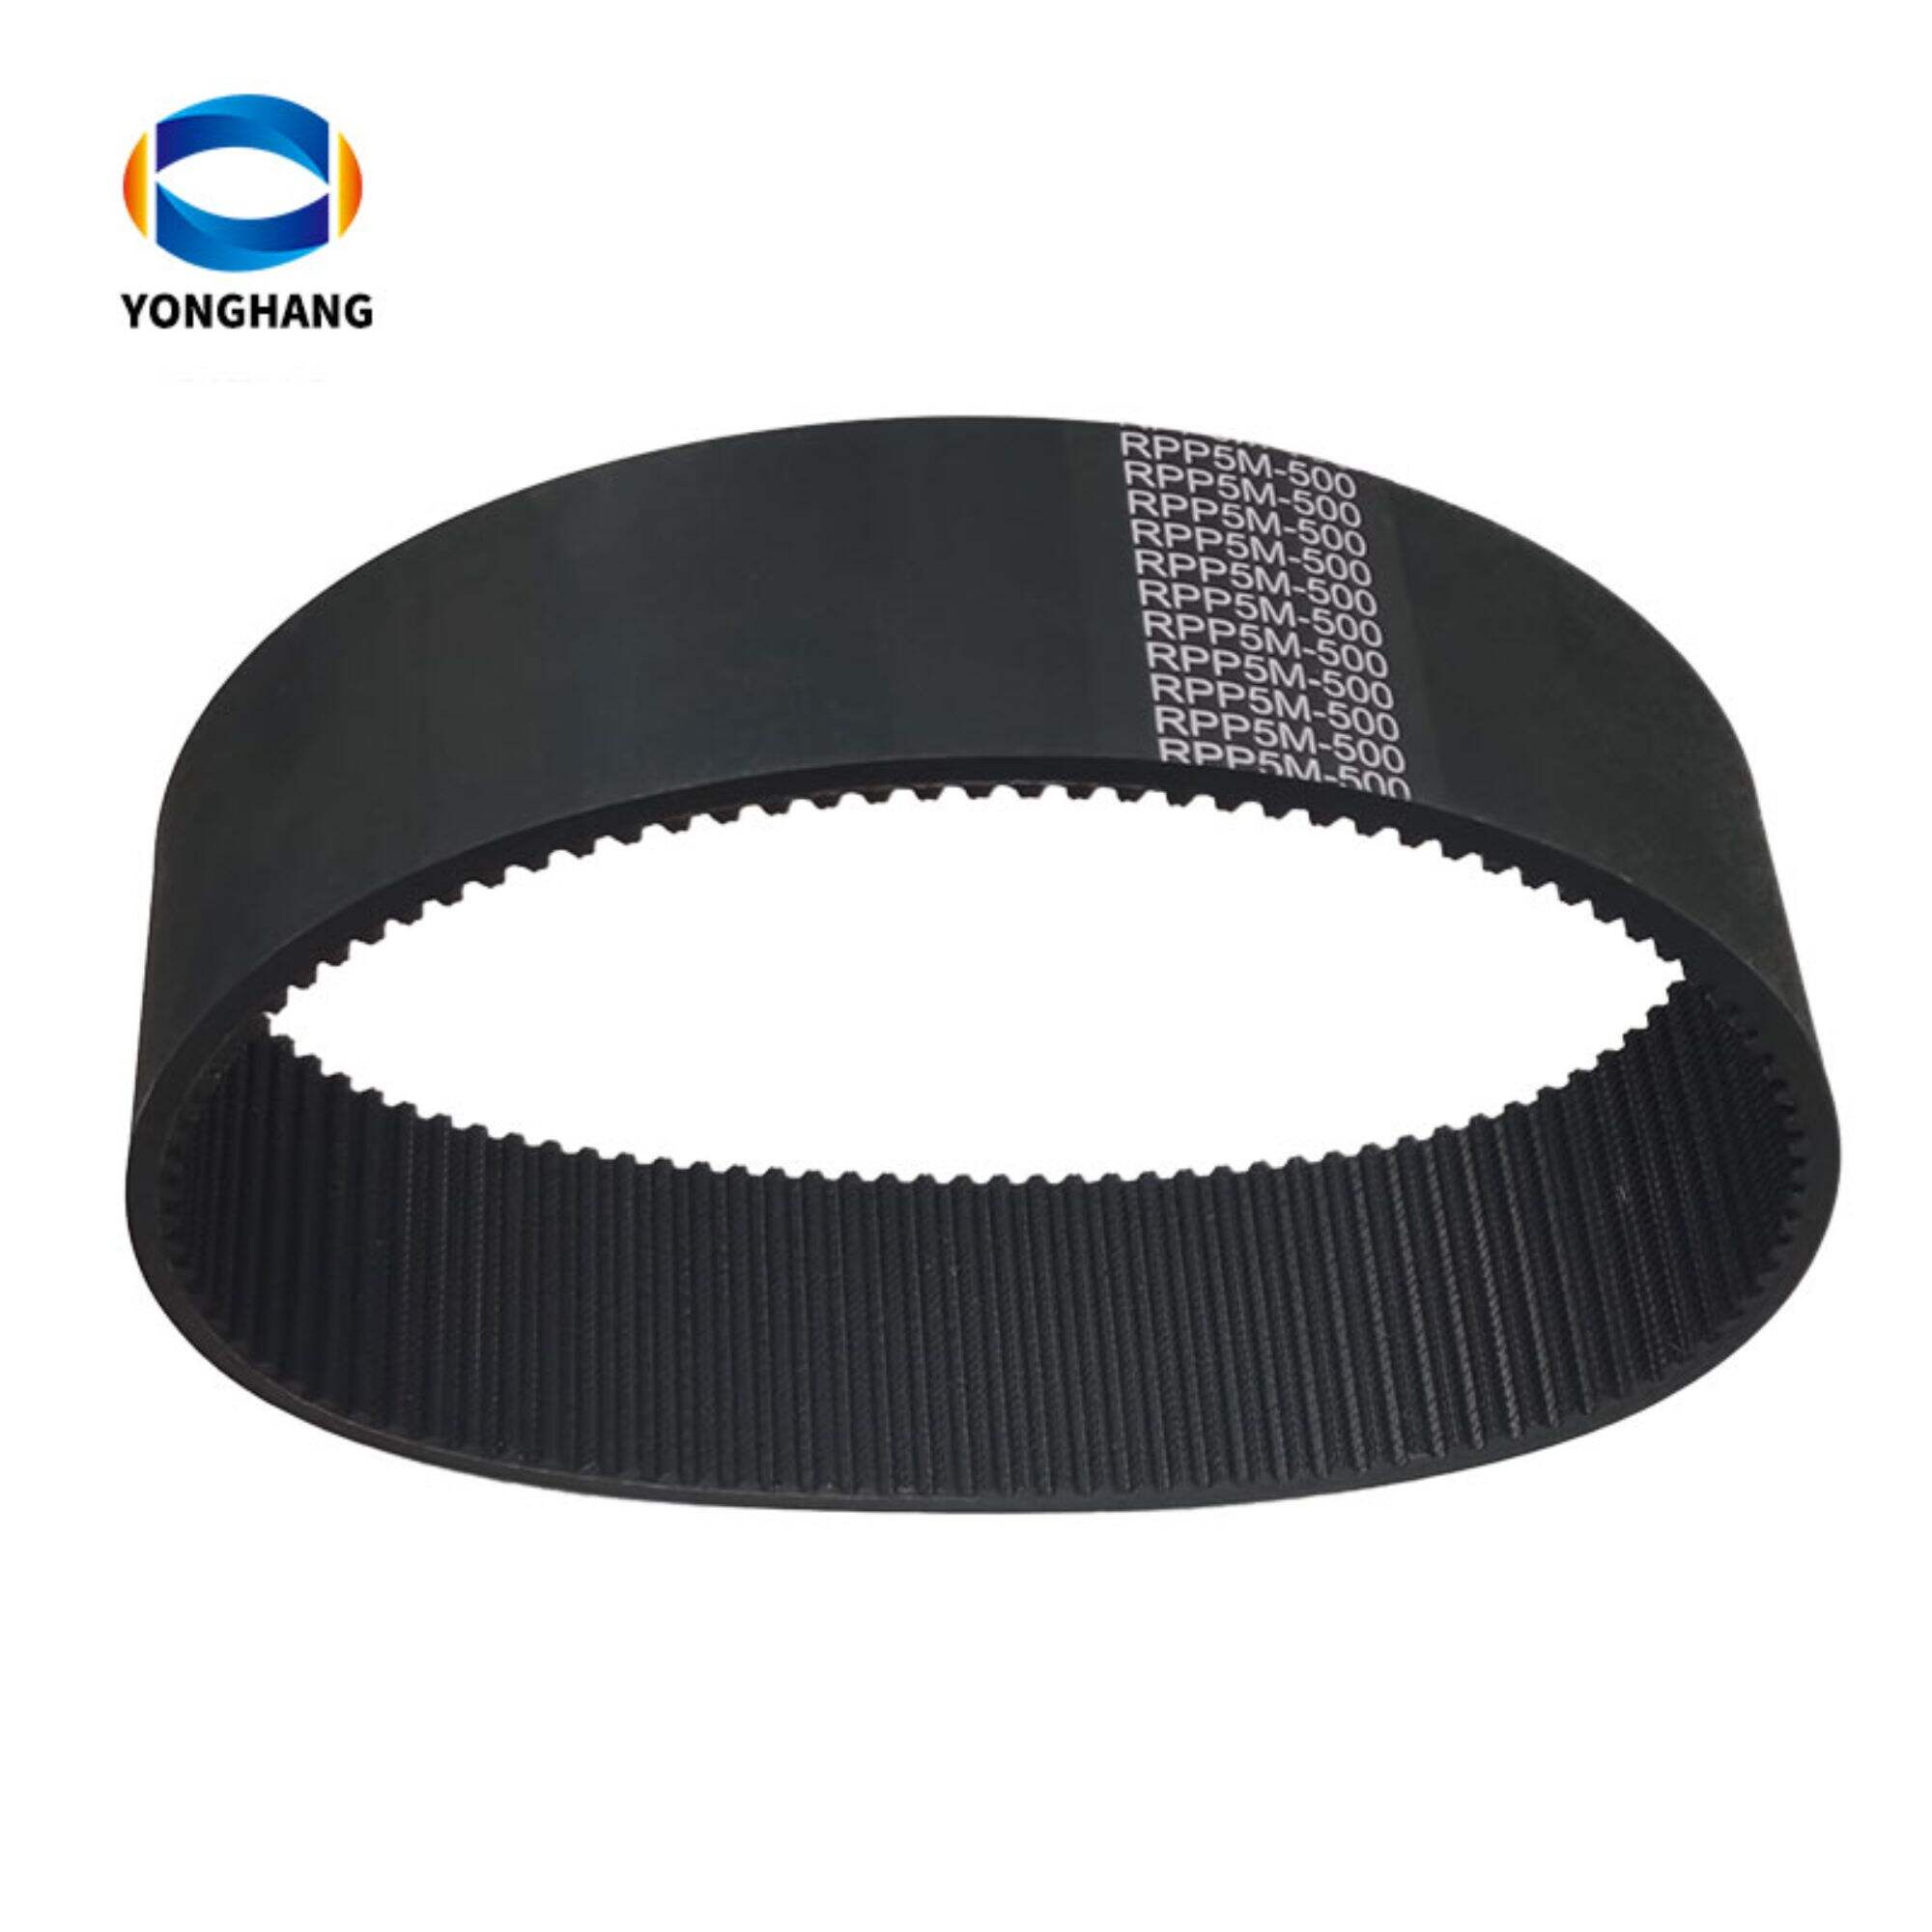 RPP5M Rubber Timing Belts